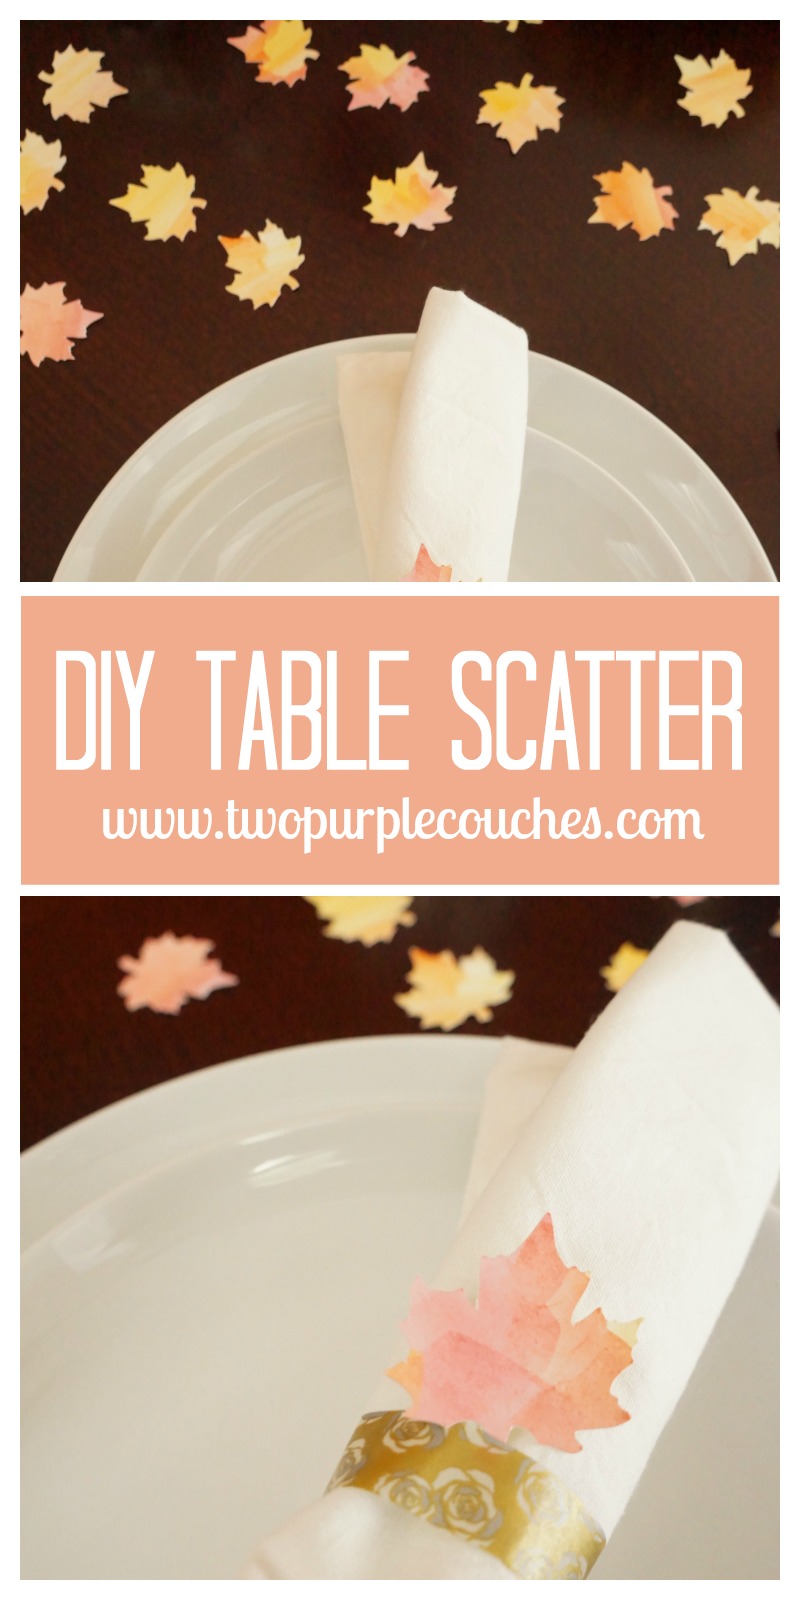 Make your own table scatter from watercolors—perfect for Thanksgiving dinner! via ww.twopurplecouches.com